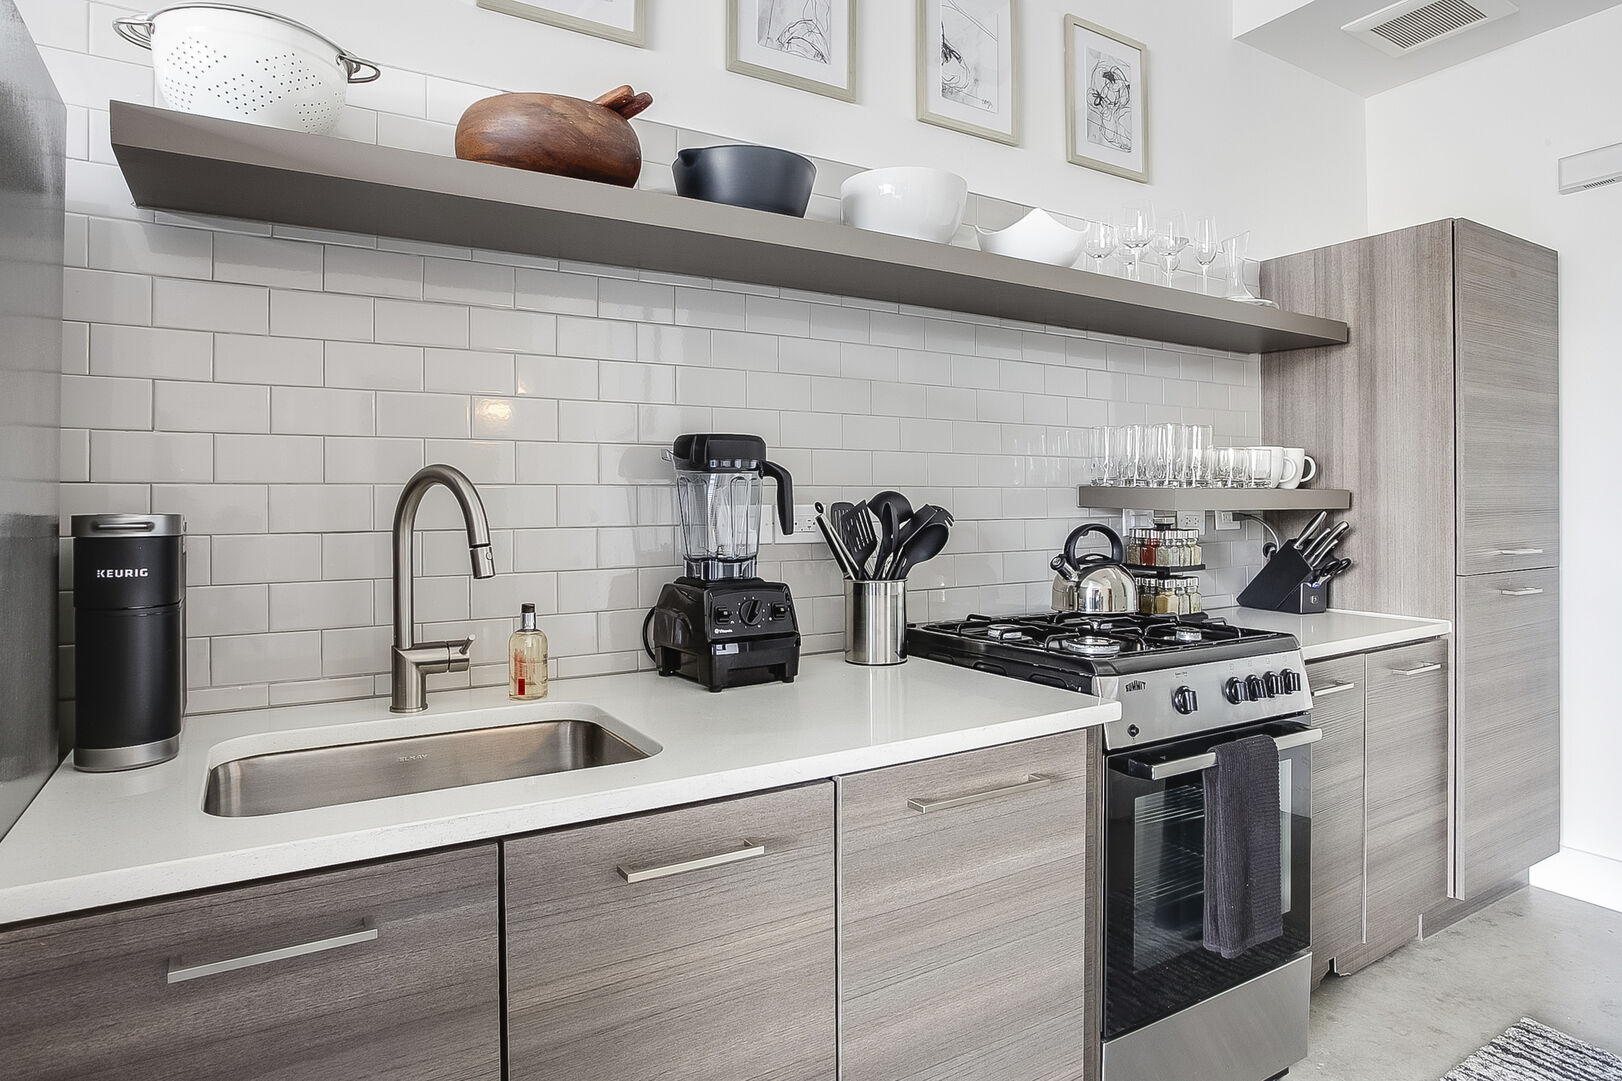 The kitchen of this Ponce City Market rental with modern appliances and a deep sink.